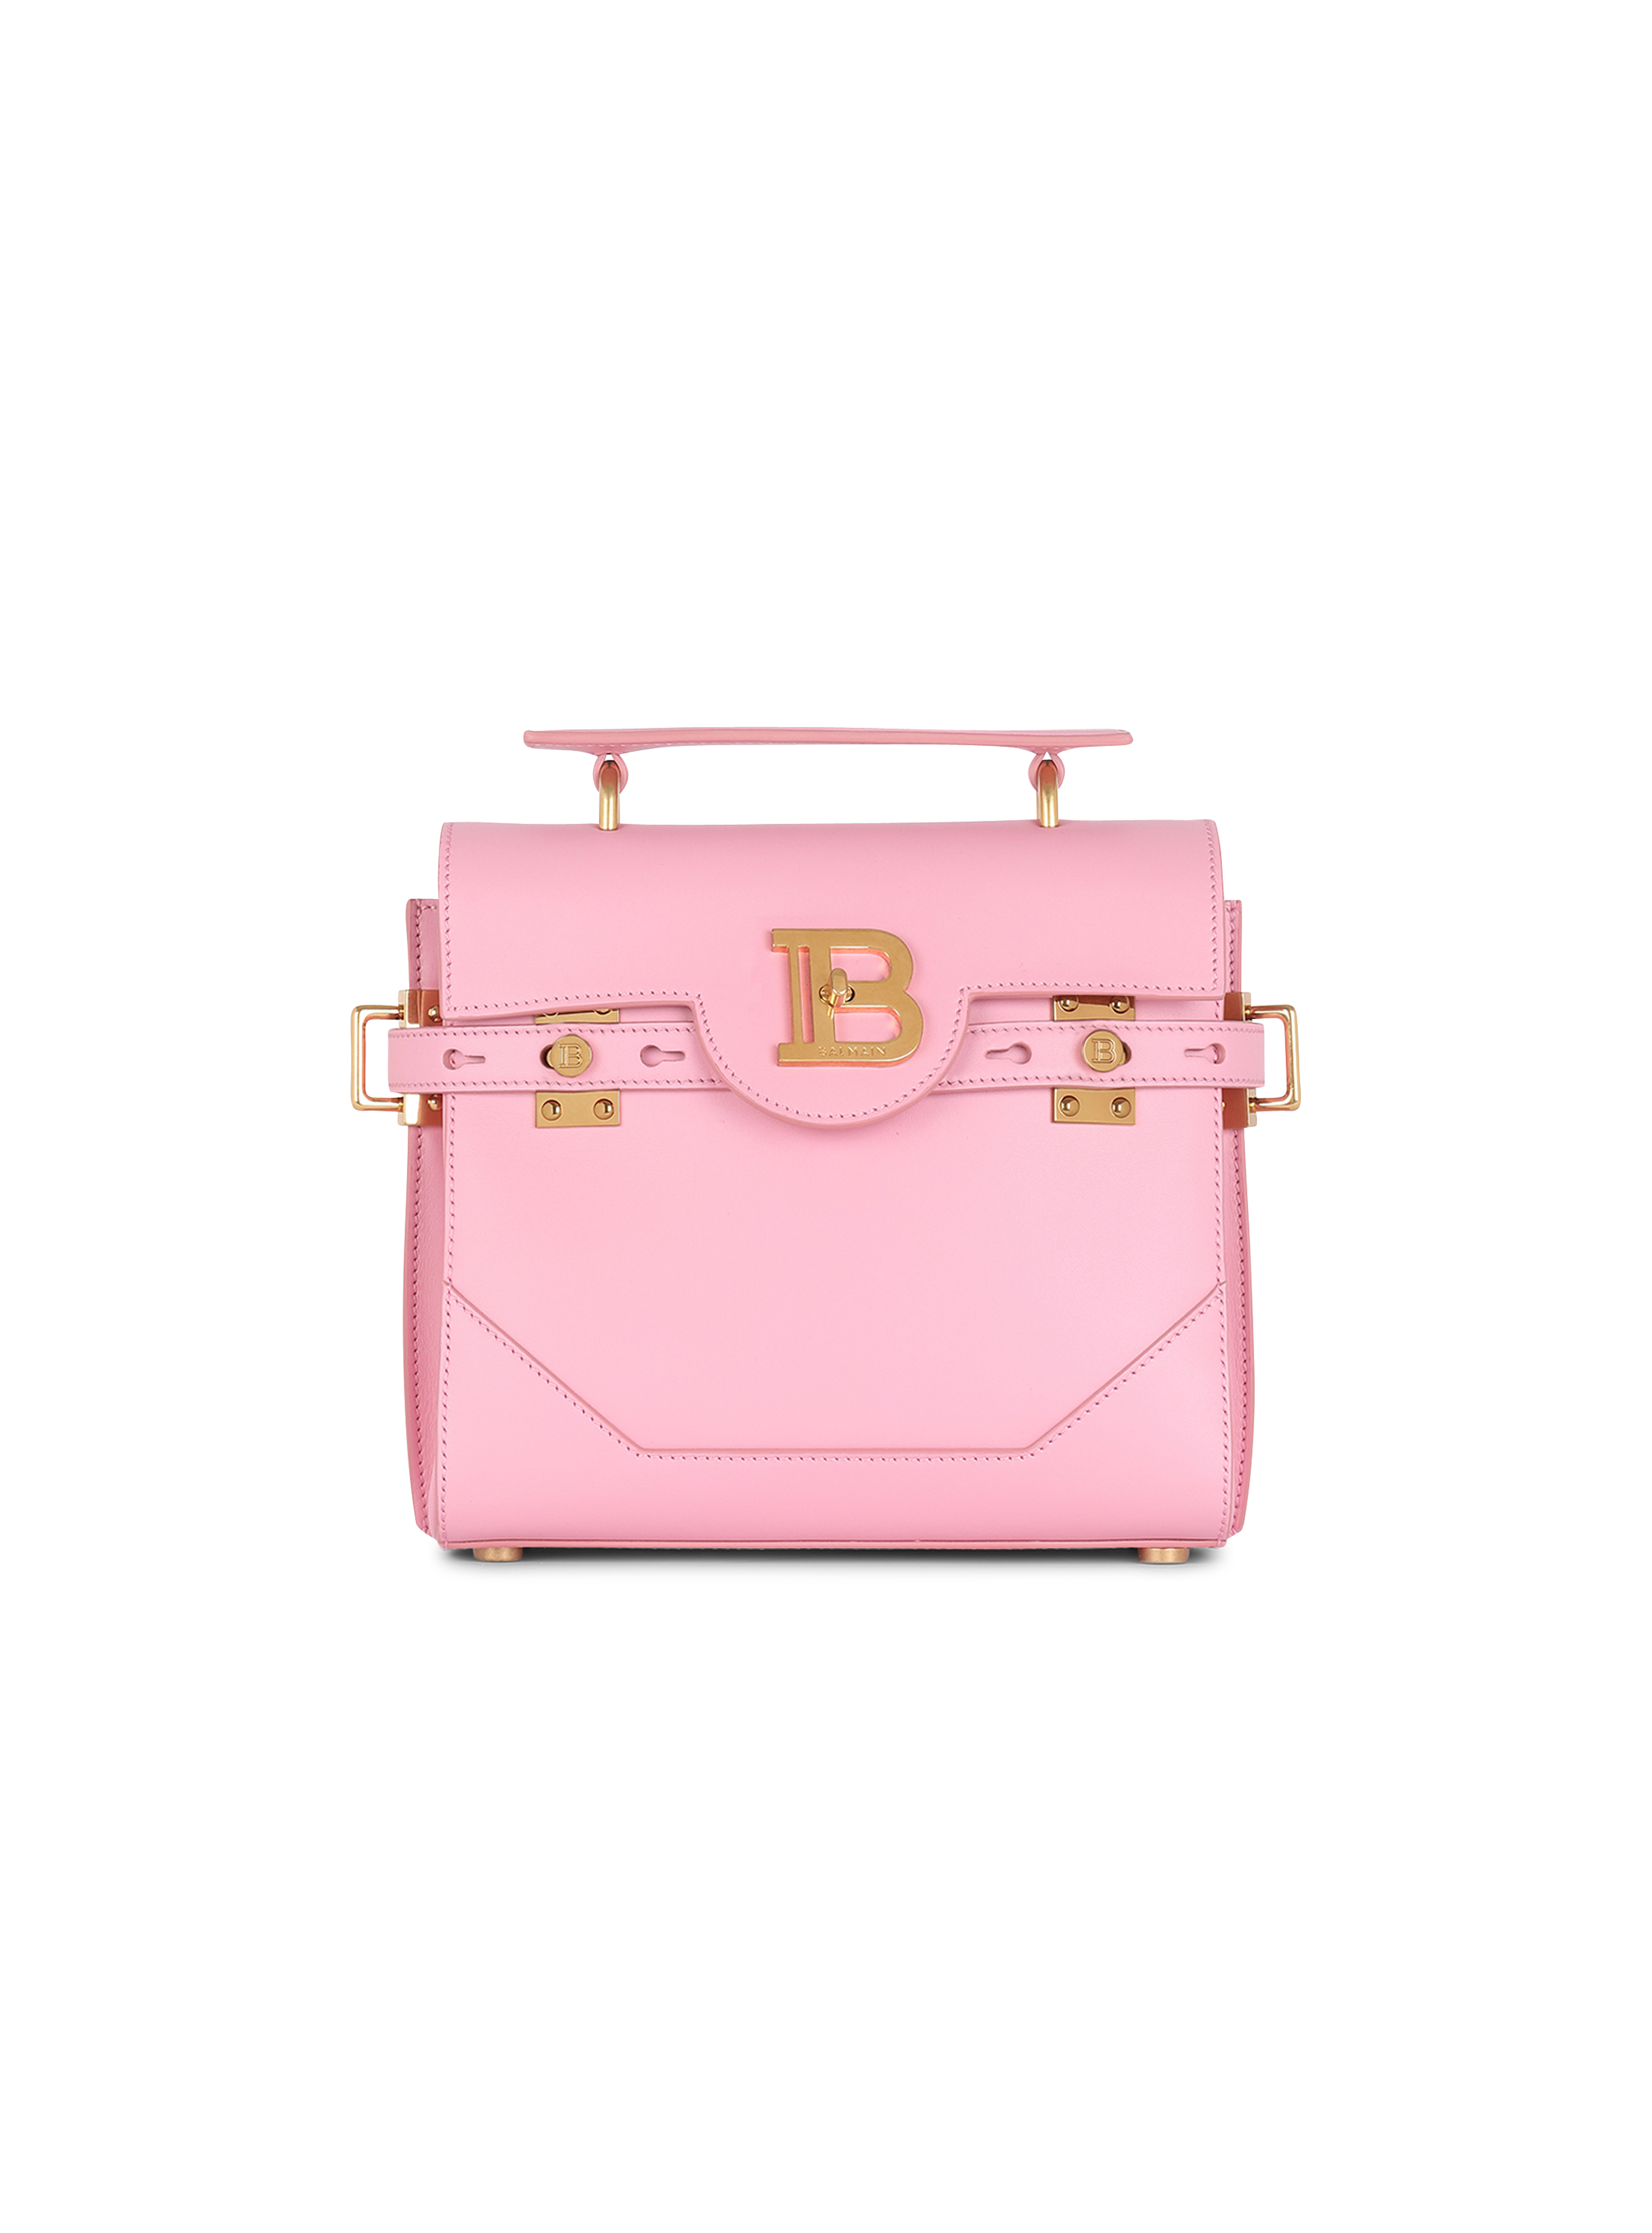 Quilted leather B-Buzz 23 bag, pink